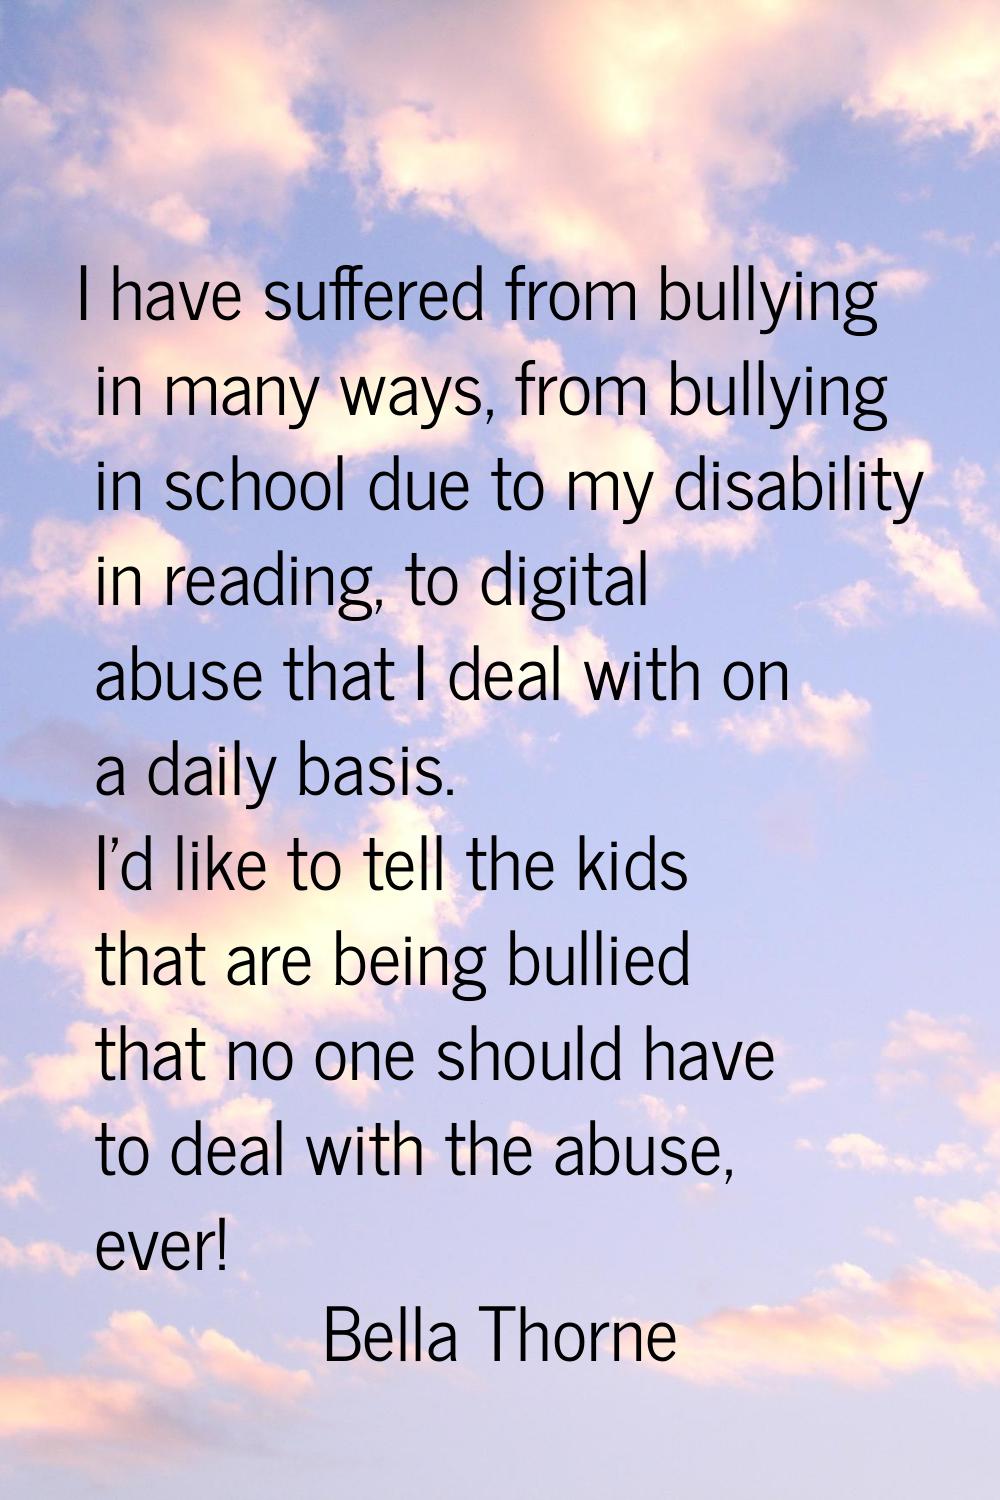 I have suffered from bullying in many ways, from bullying in school due to my disability in reading